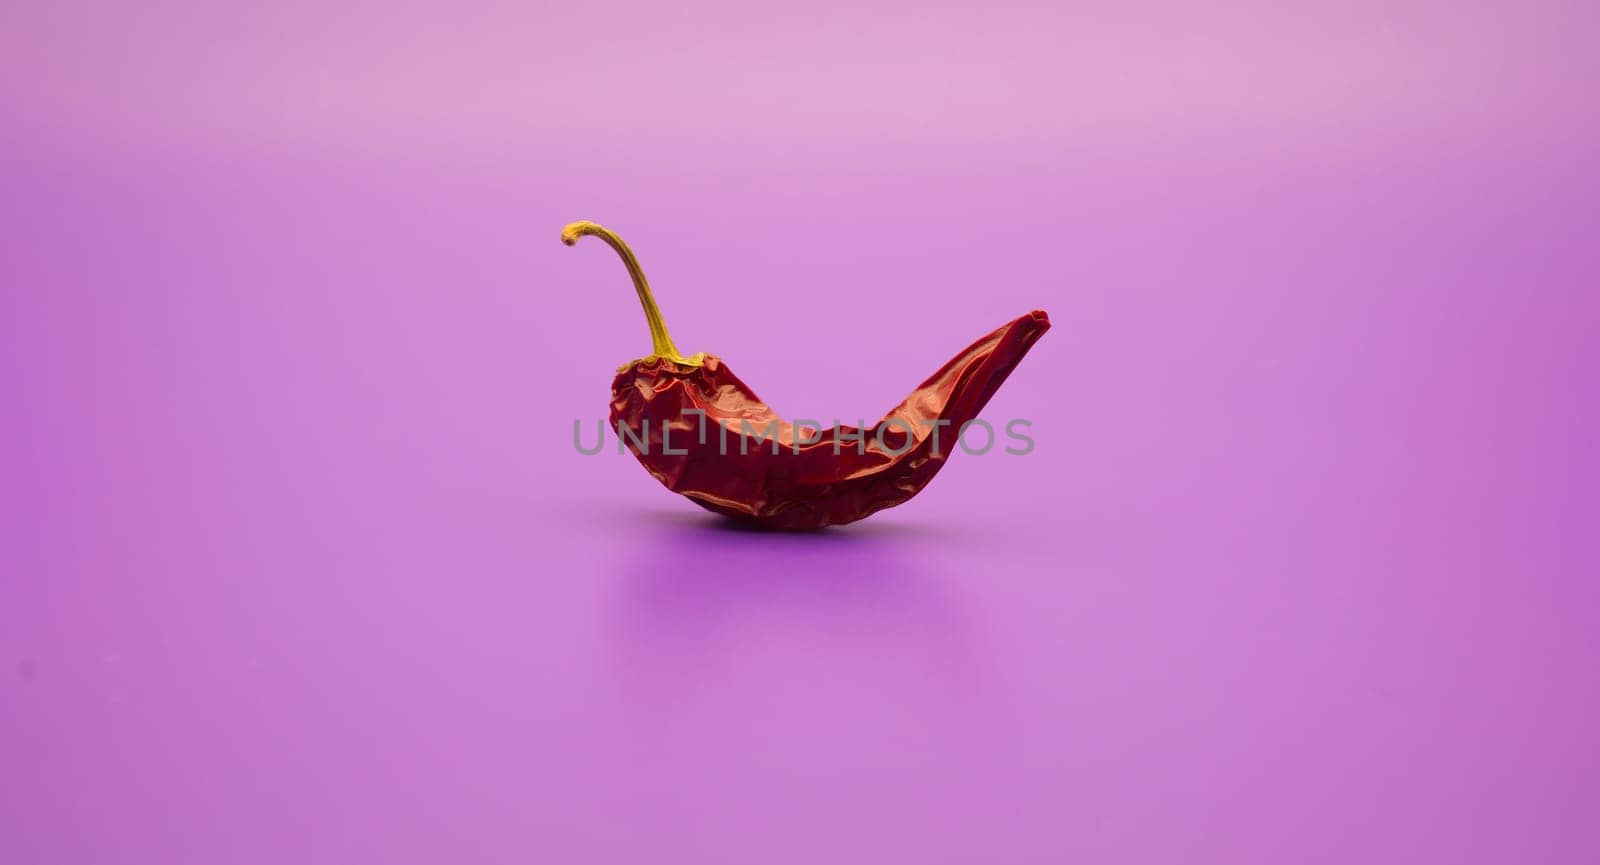 Dried red chili peppers against a vivid lilac background by NetPix